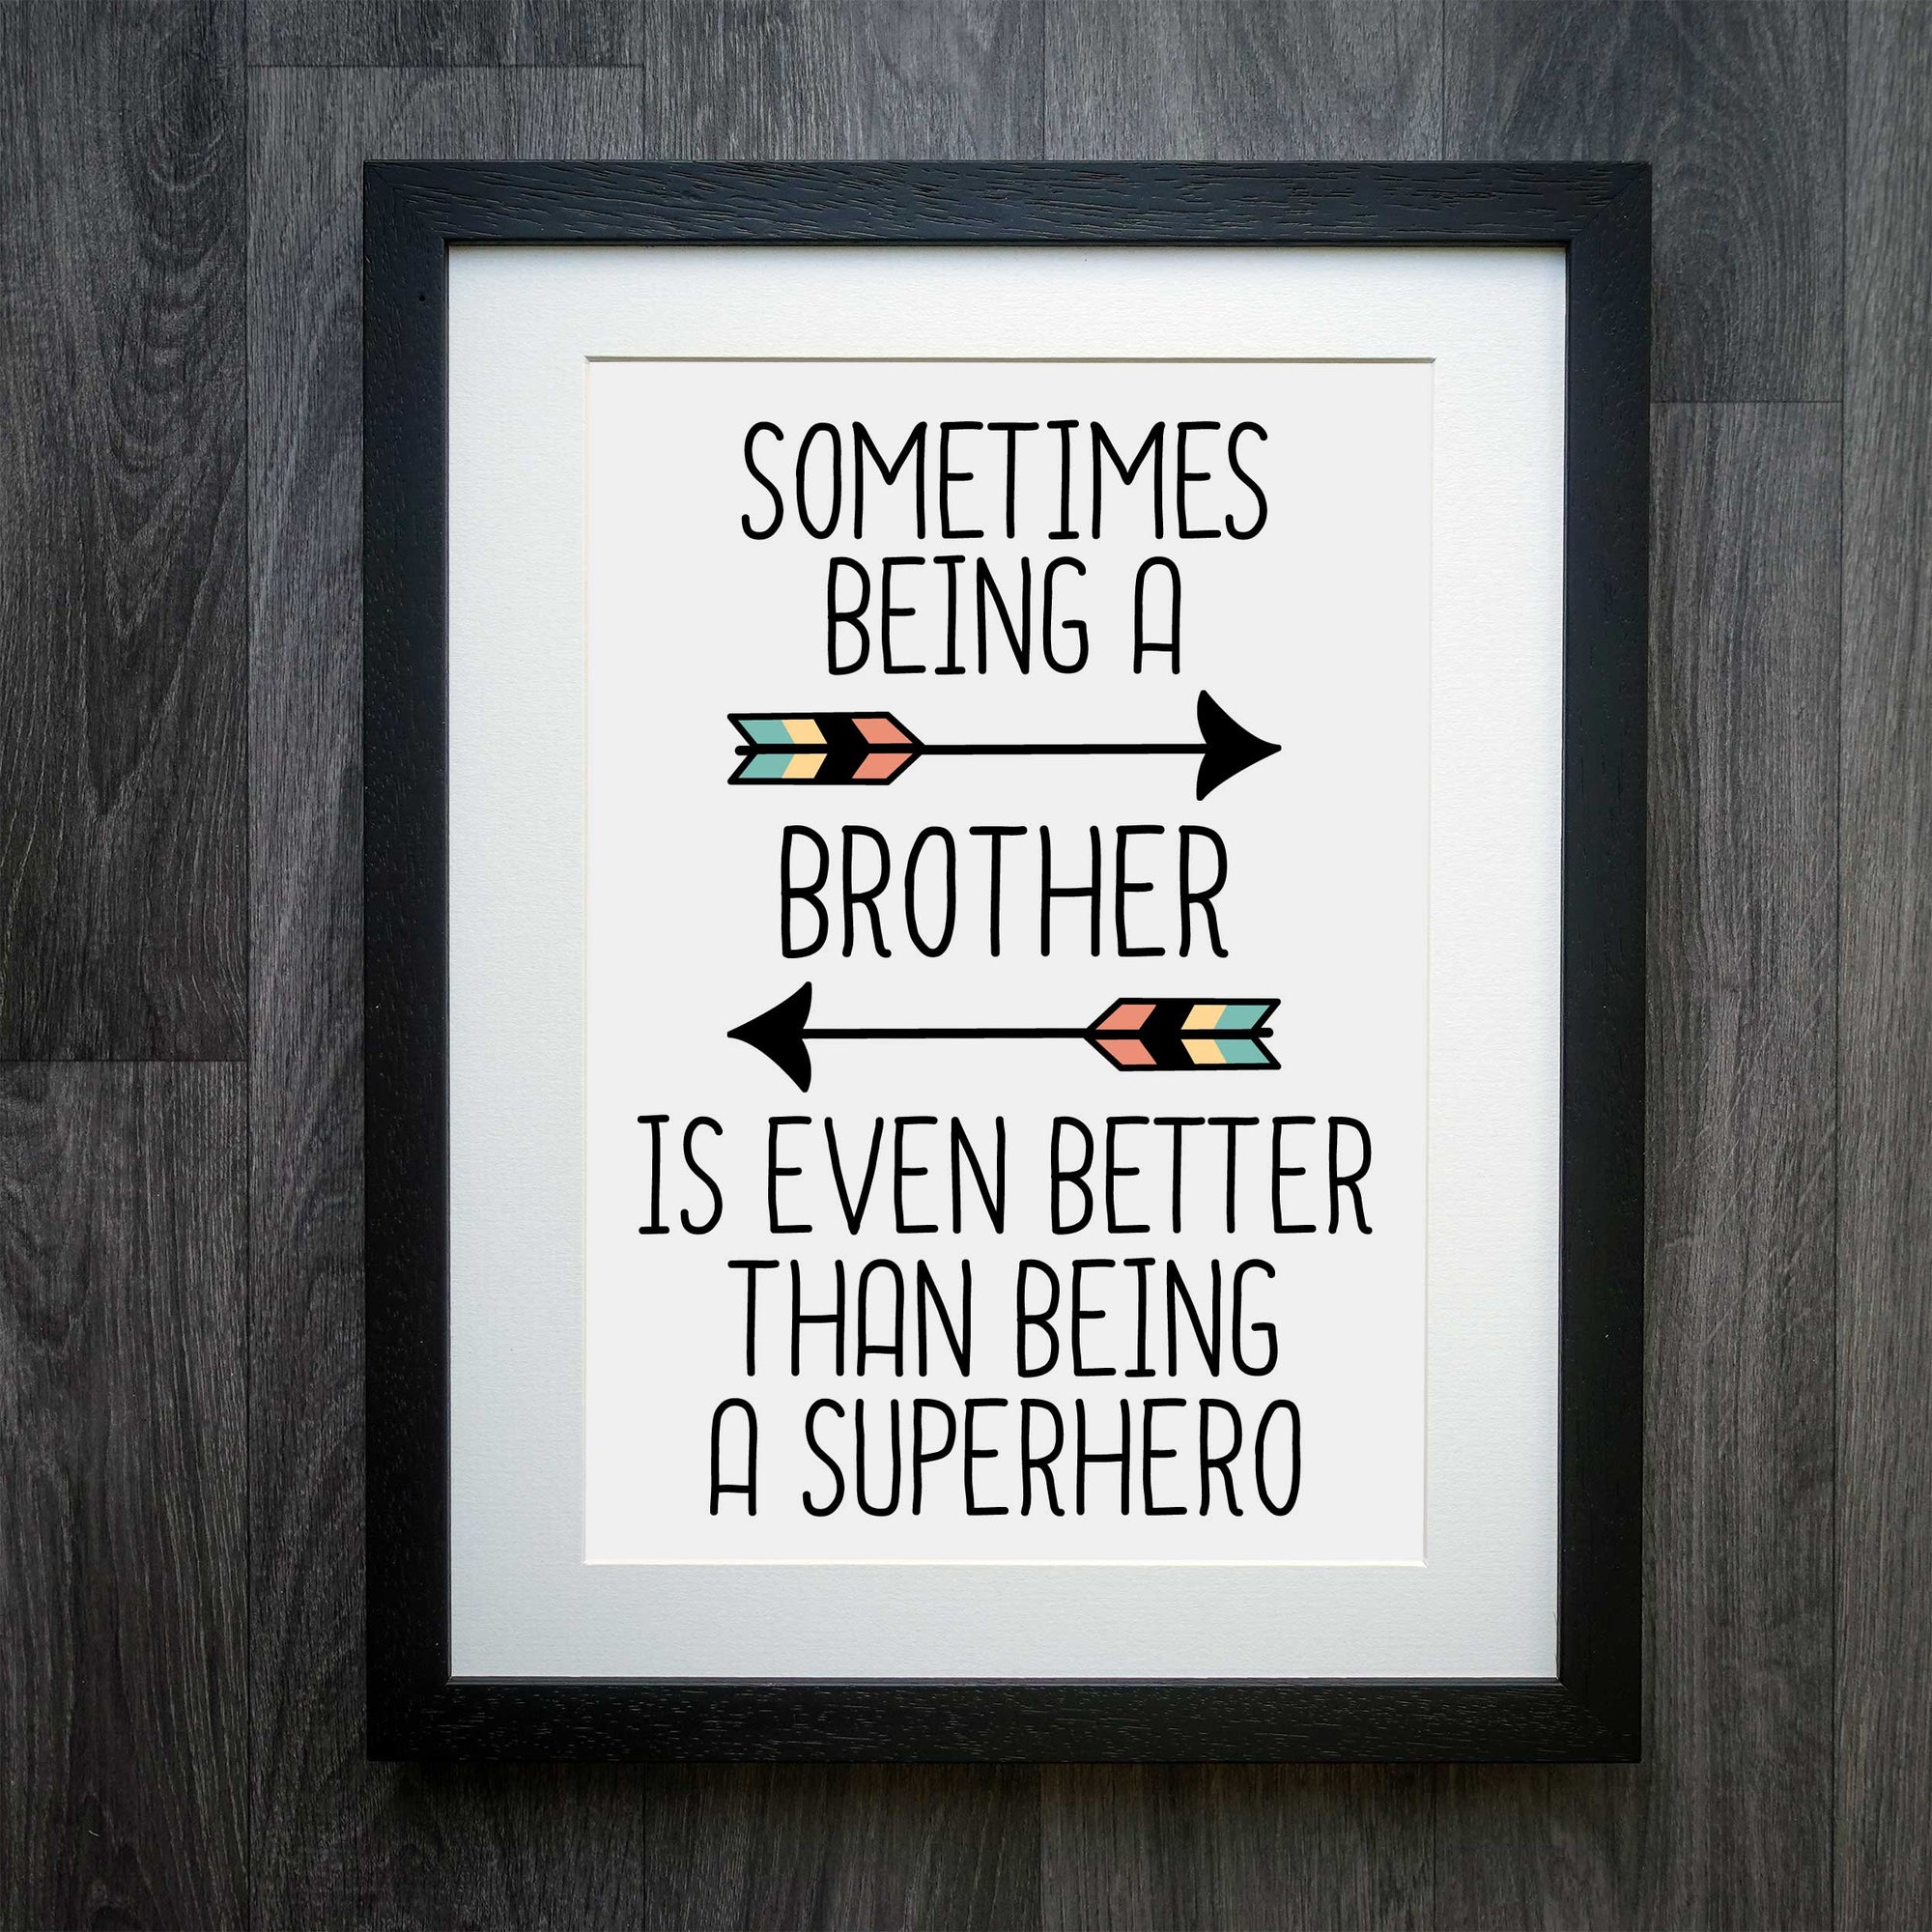 Better Than a Superhero Brother Print: A Heartfelt Homage to Sibling Bonds and Everyday Heroism